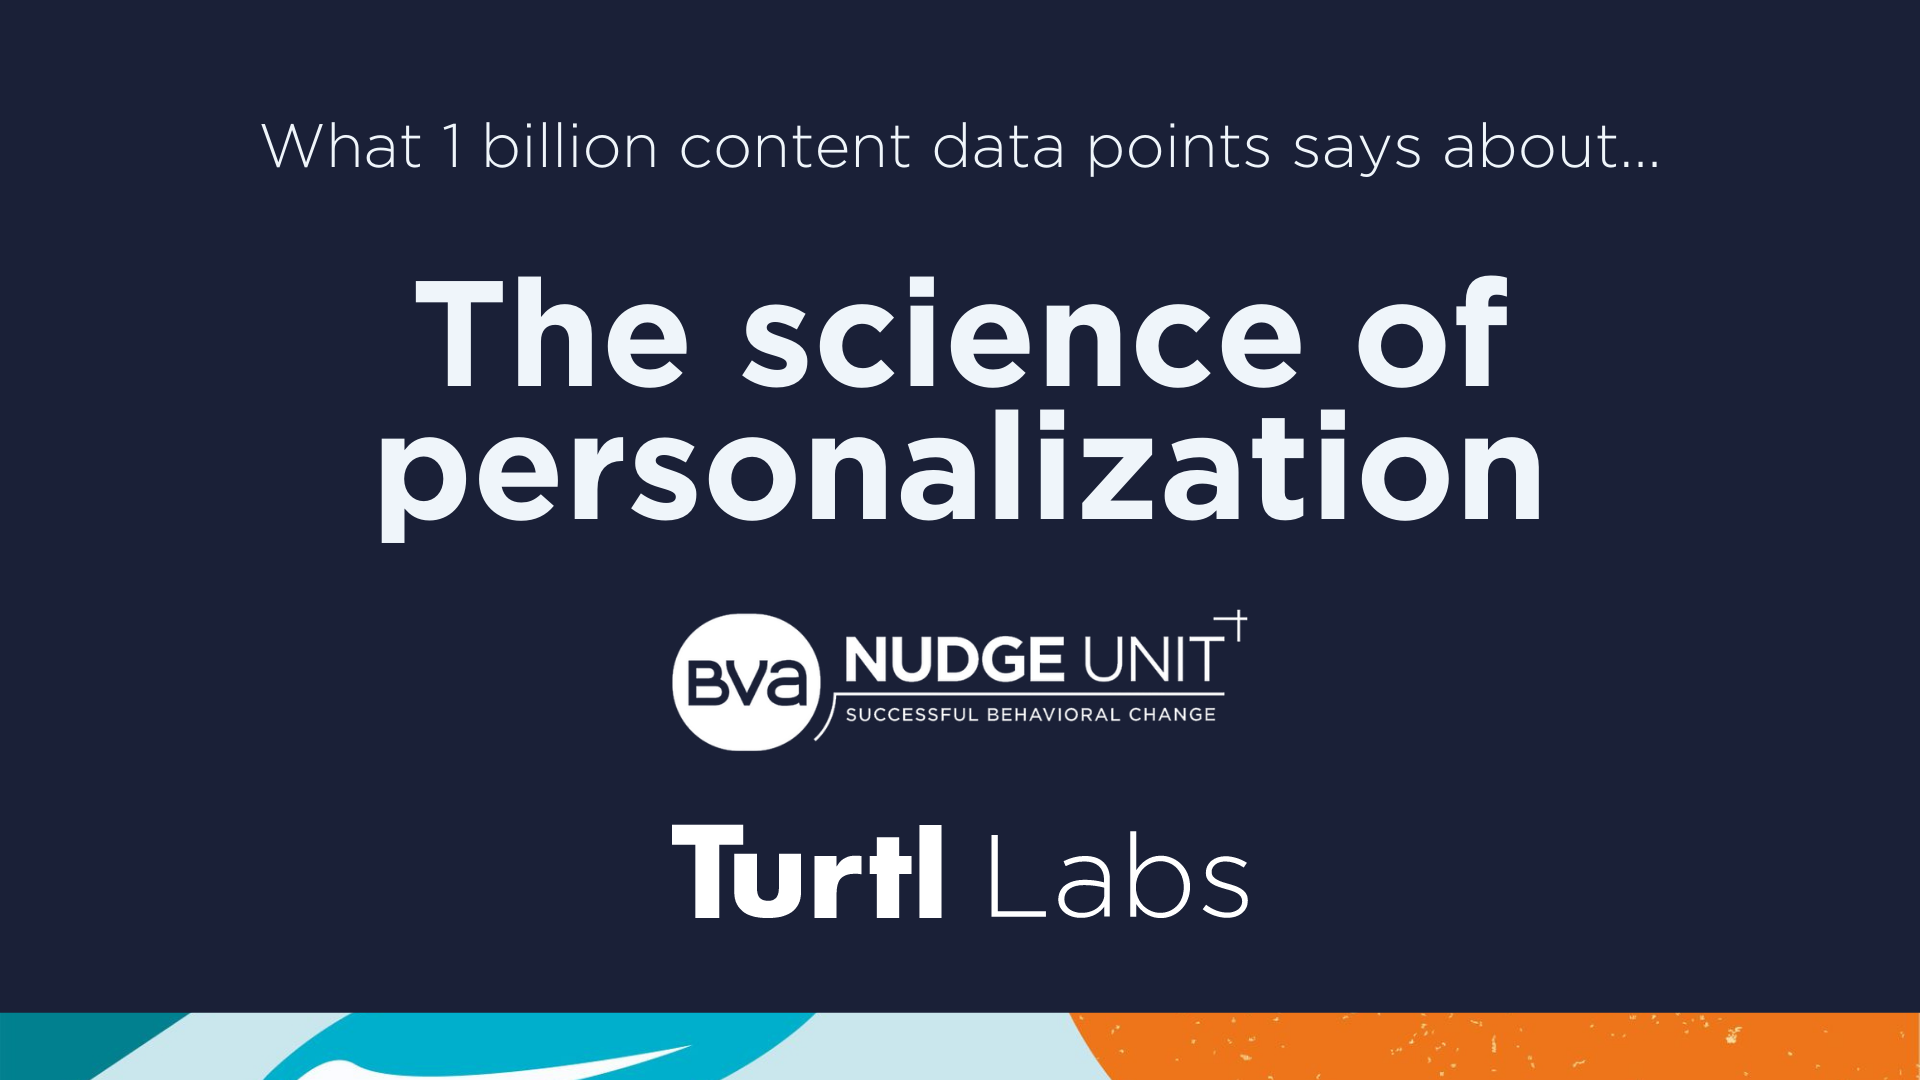 Turtl Labs webinar advertisement: discover what 1 billion content data points days about the science of personalization